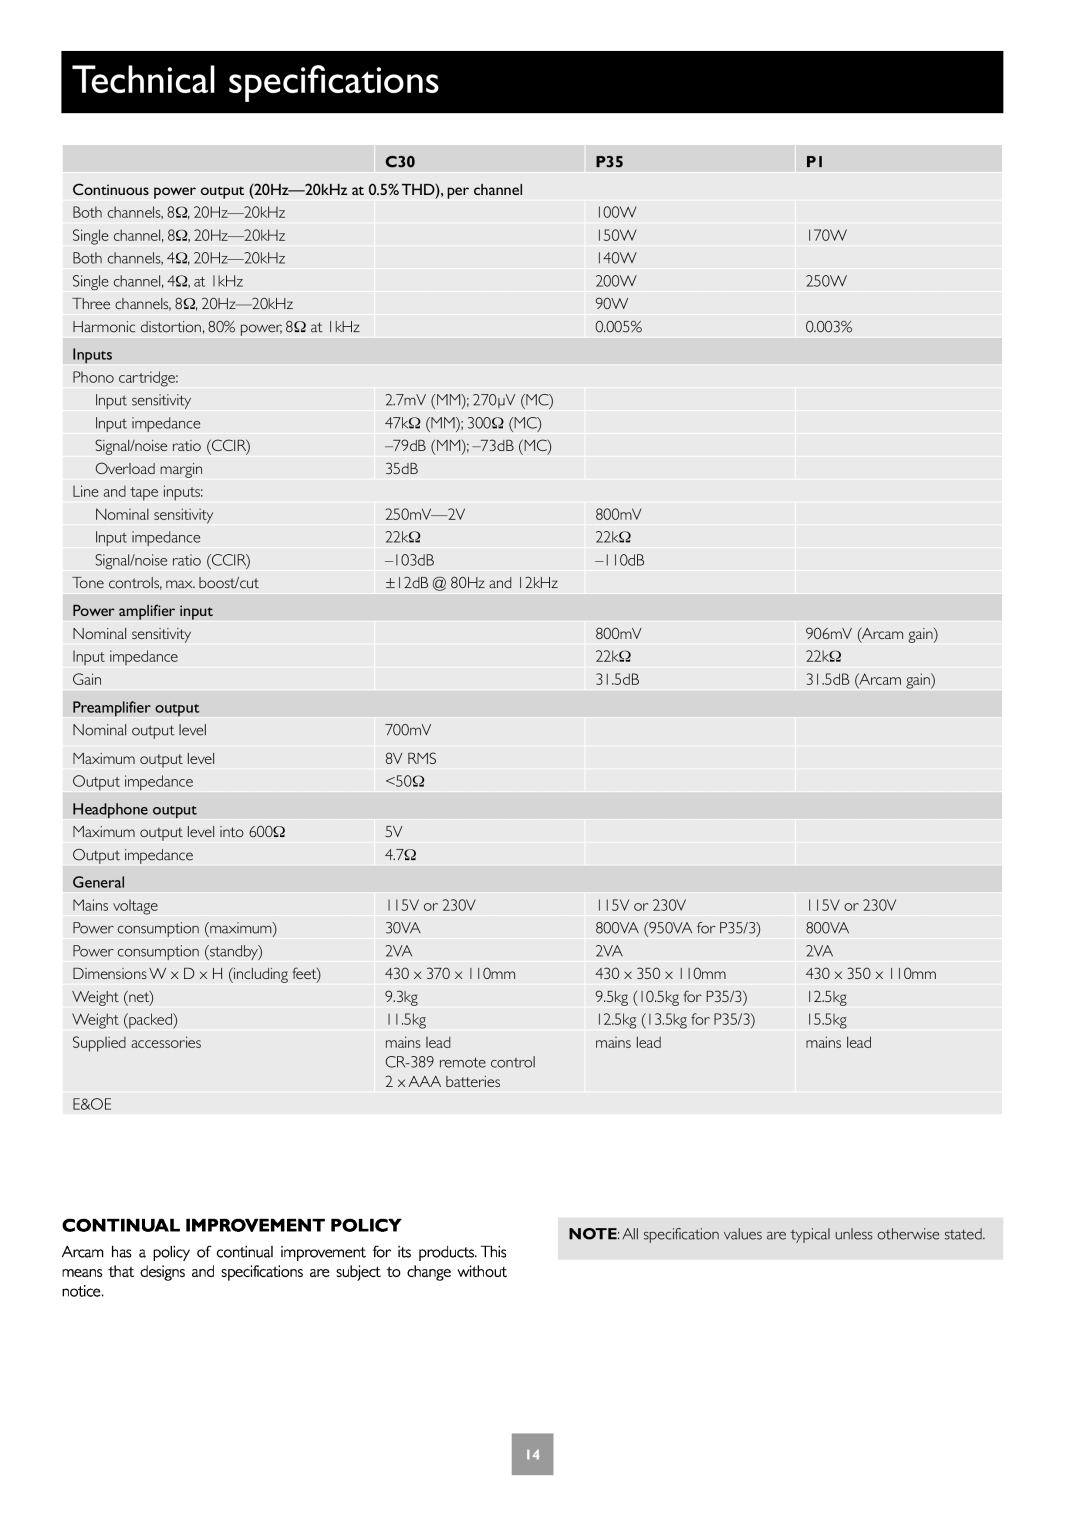 Arcam P35 manual Technical specifications, Continual Improvement Policy 